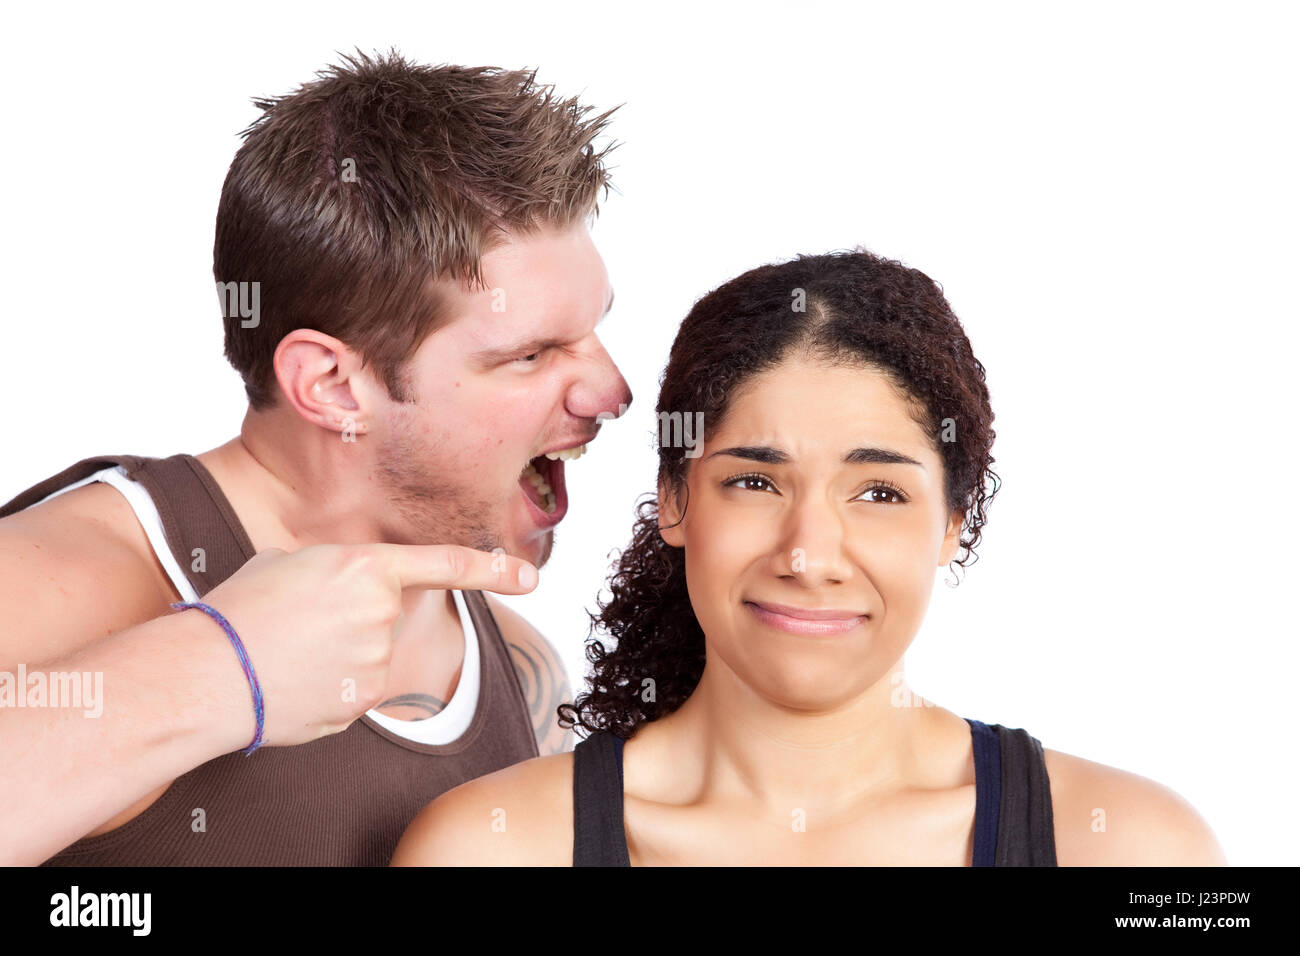 A personal trainer screaming at a woman Stock Photo - Alamy